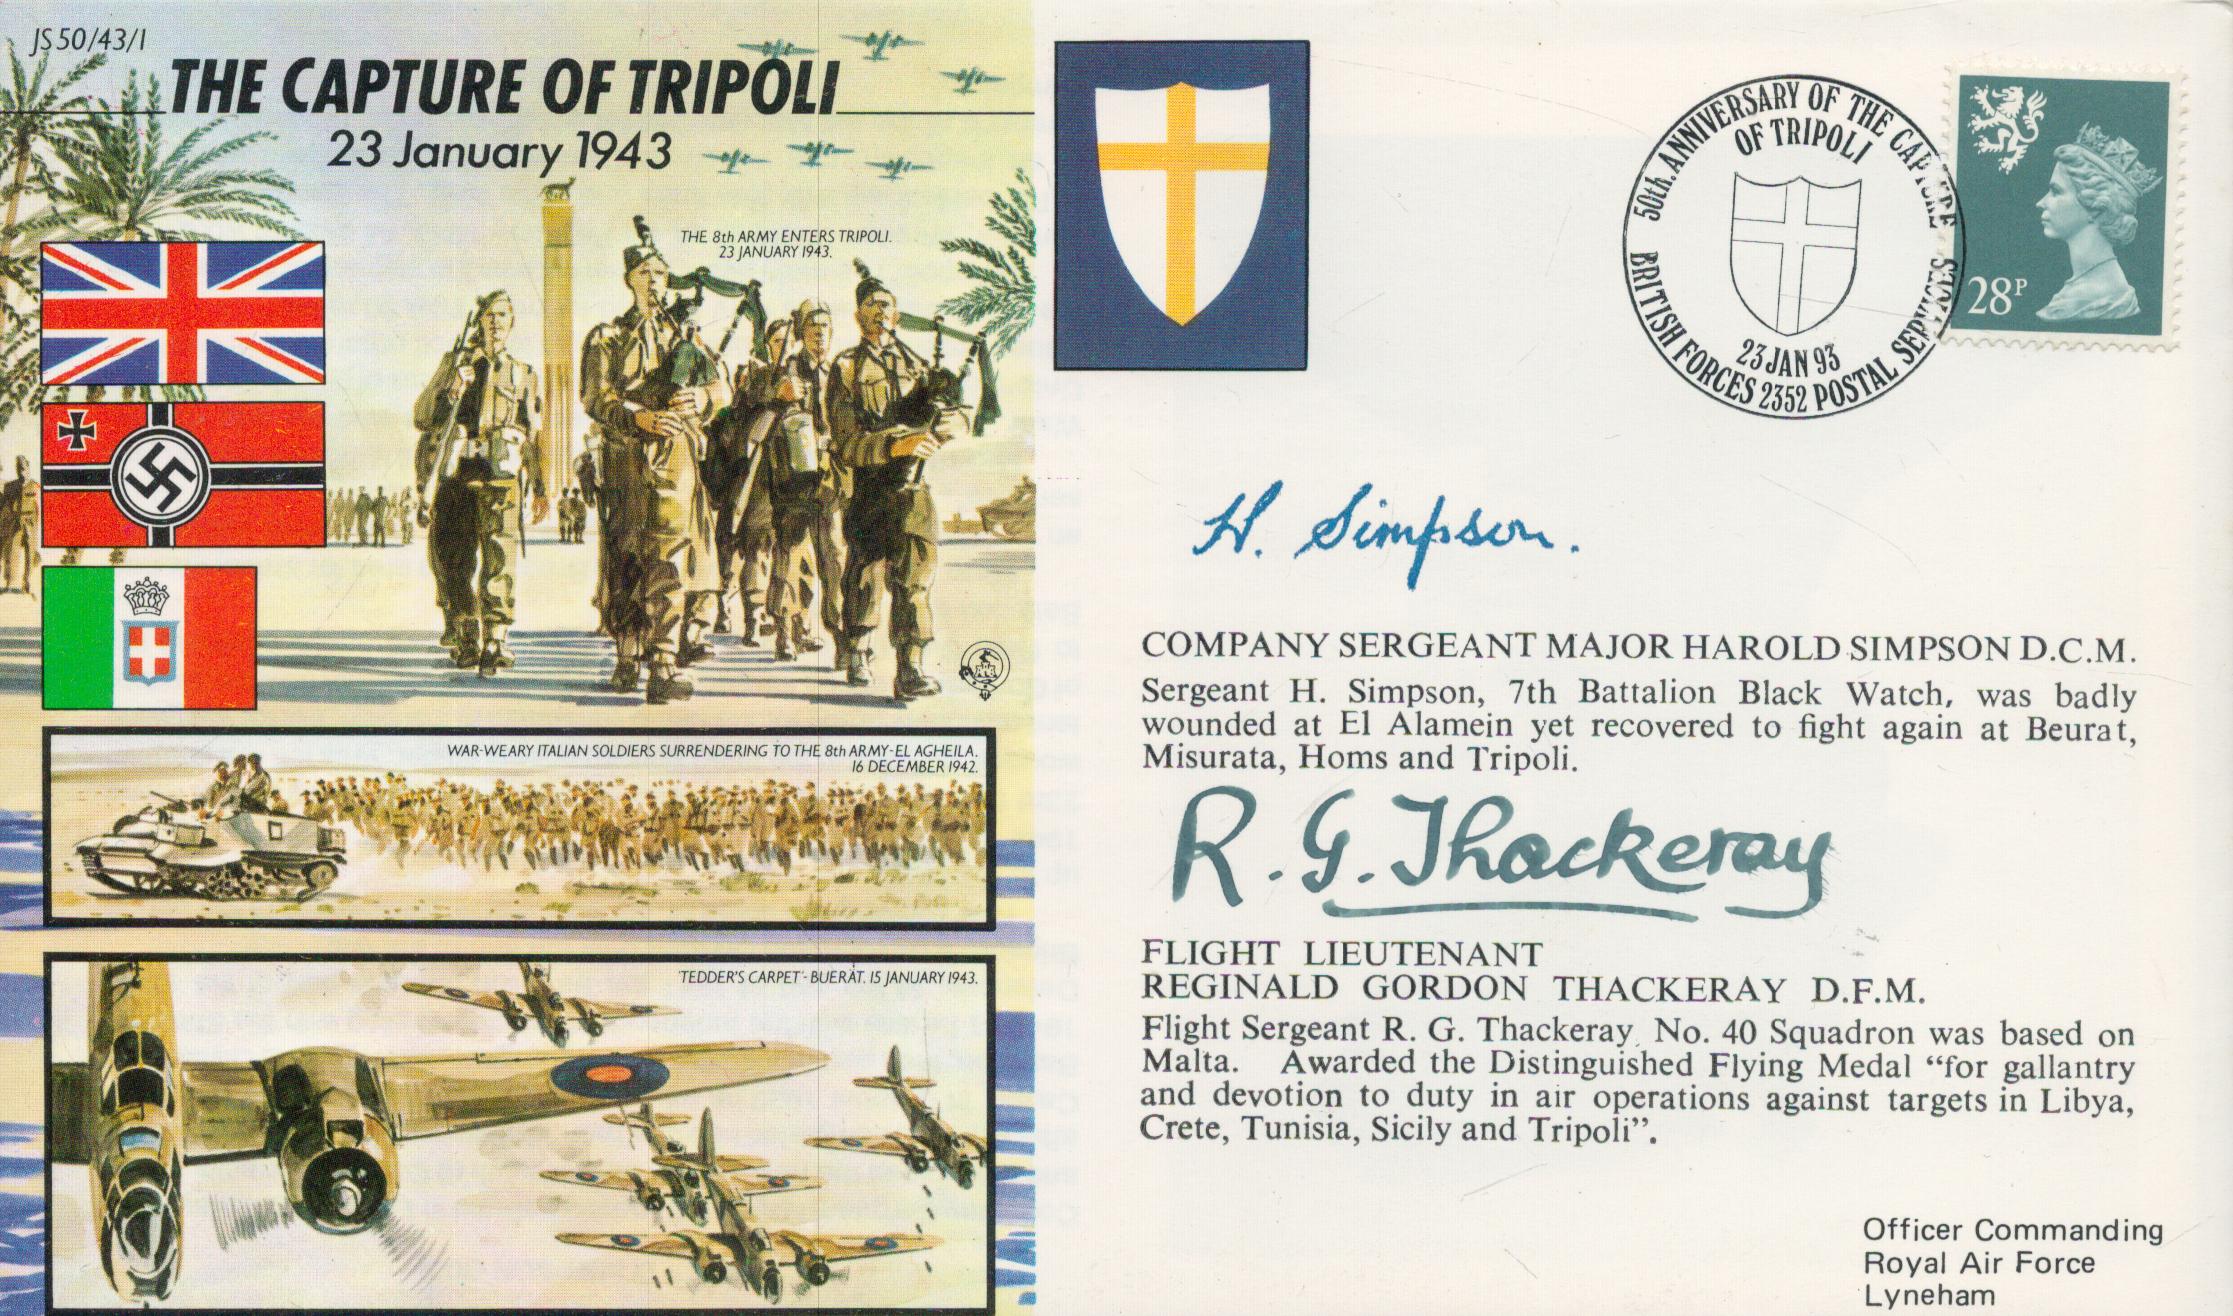 Capture of Tripoli double signed 50th ann WW2 cover JS50/43/1. Signed by veterans Sgt Mjr Harold